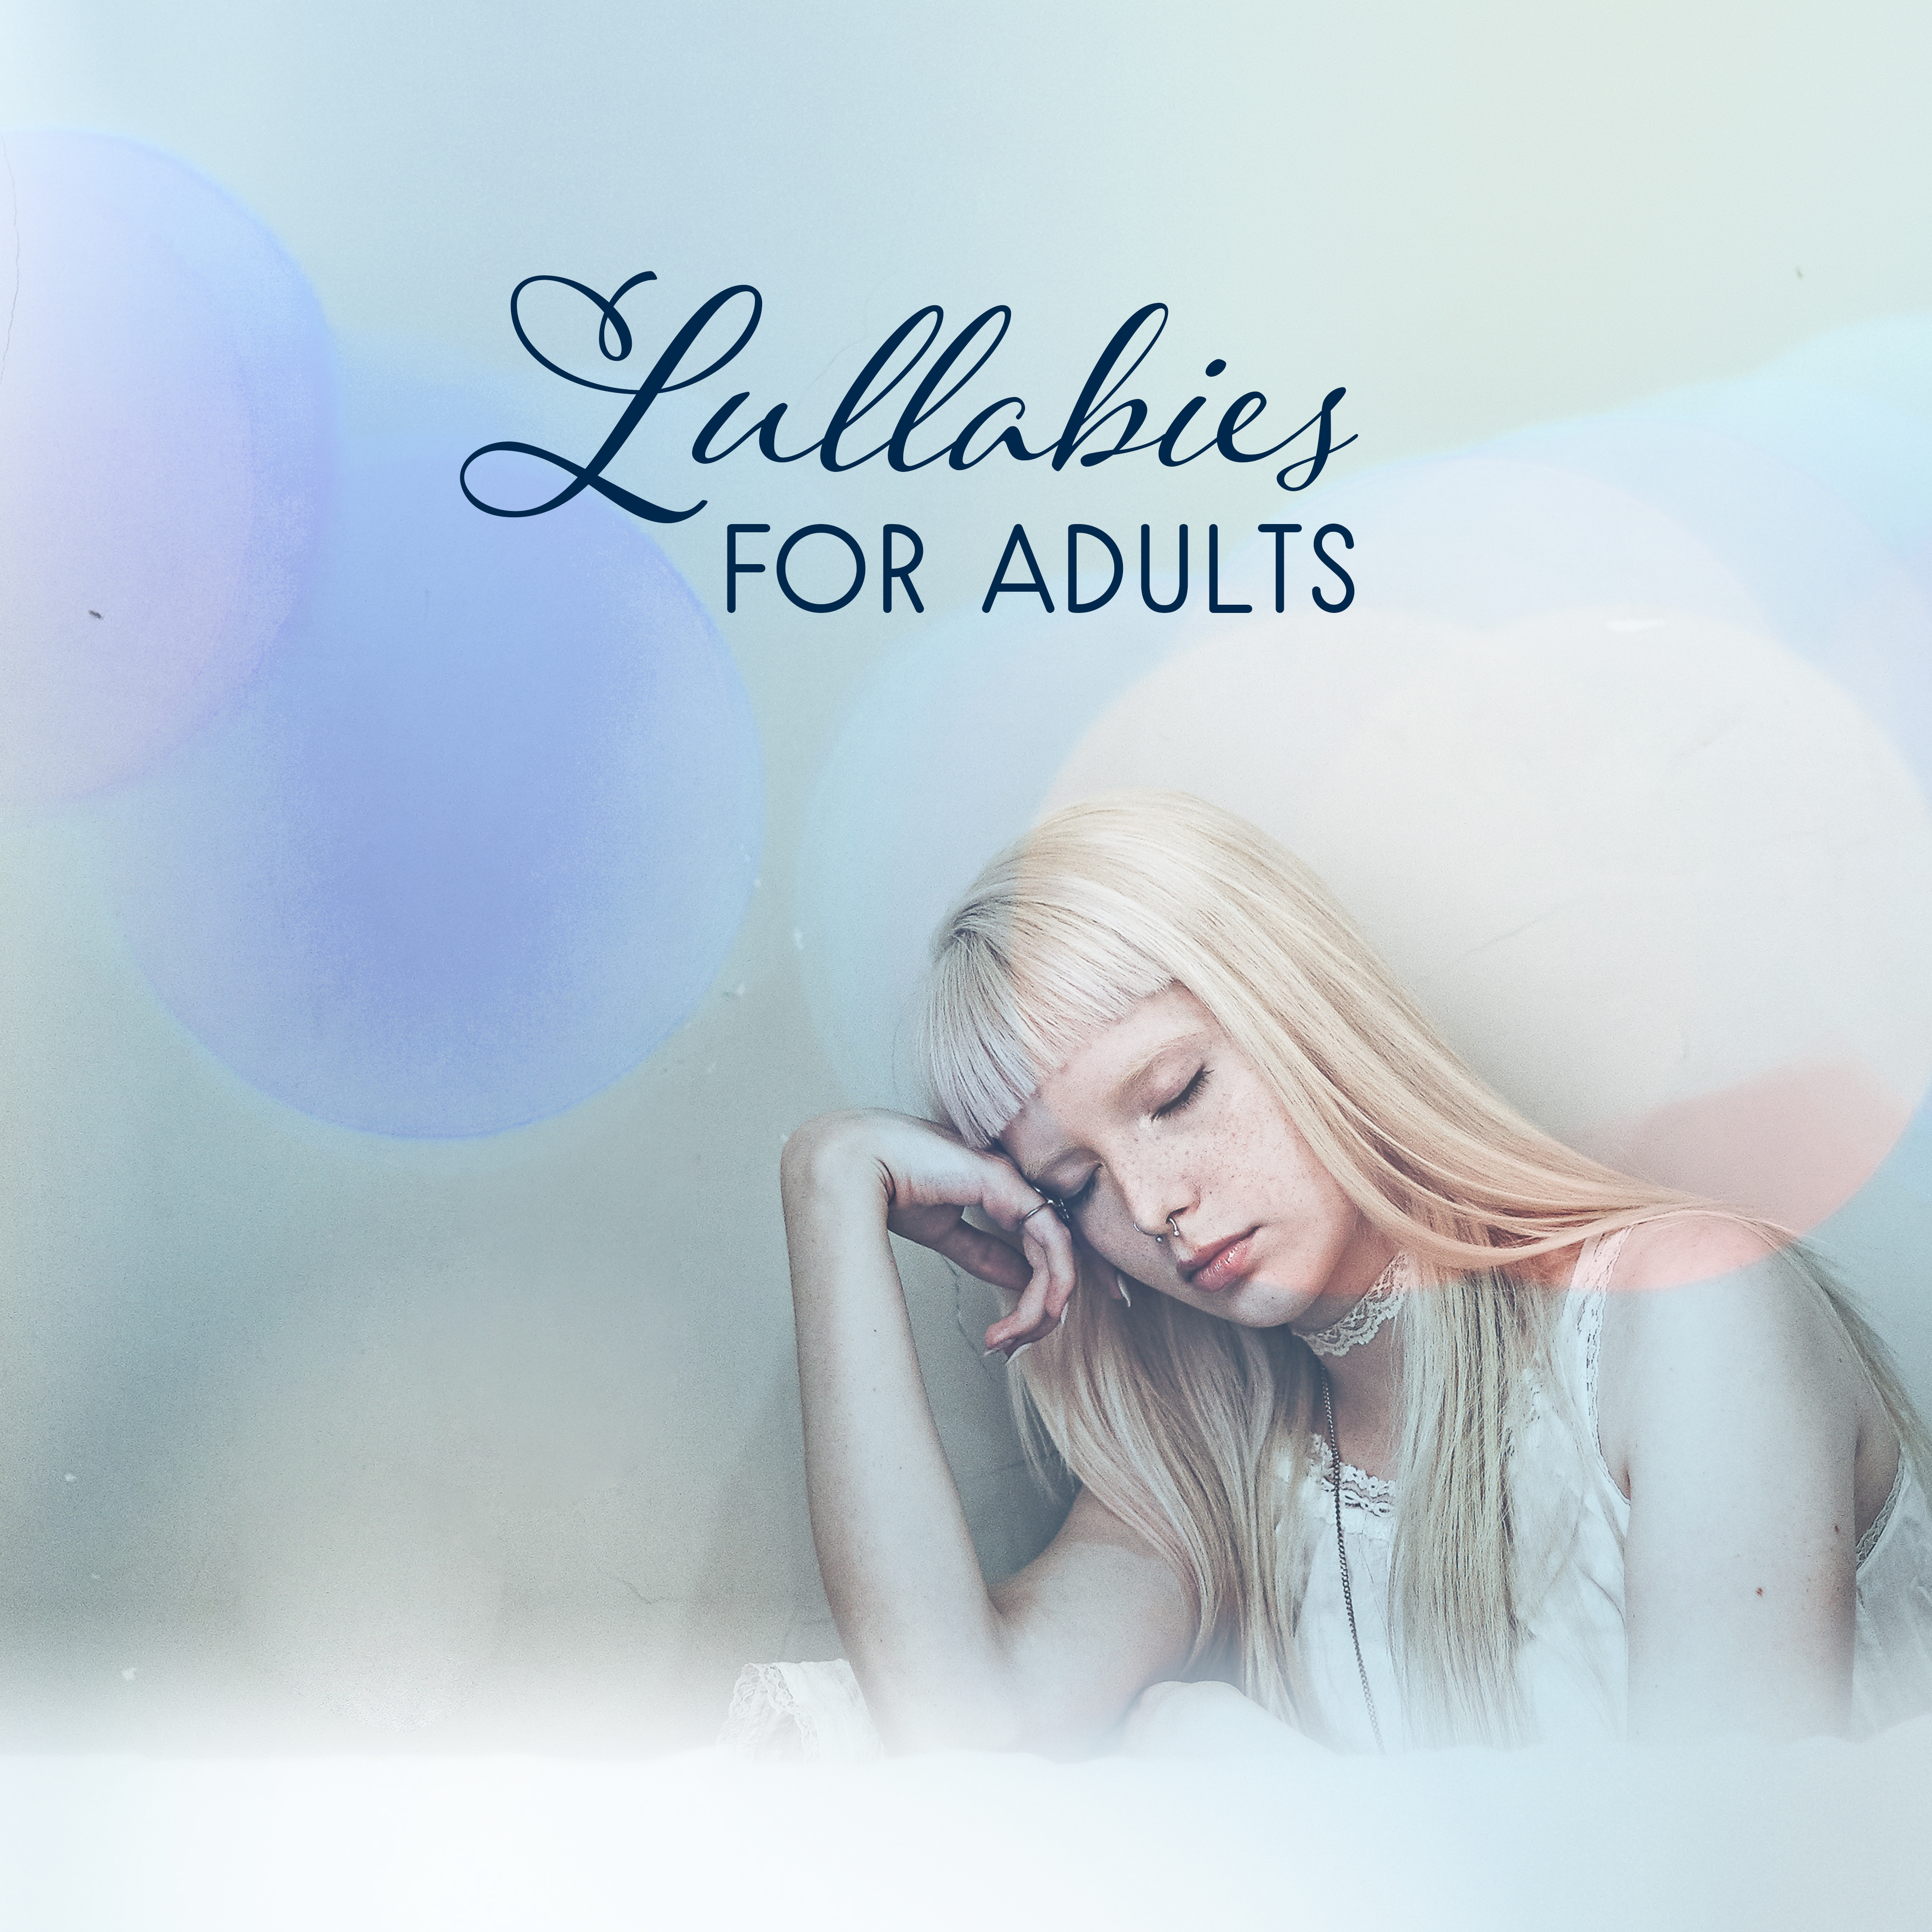 Lullabies for Adults – Chilled Time, Sleep Music, Pure Mind, New Age at Goodnight, Relax & Chill